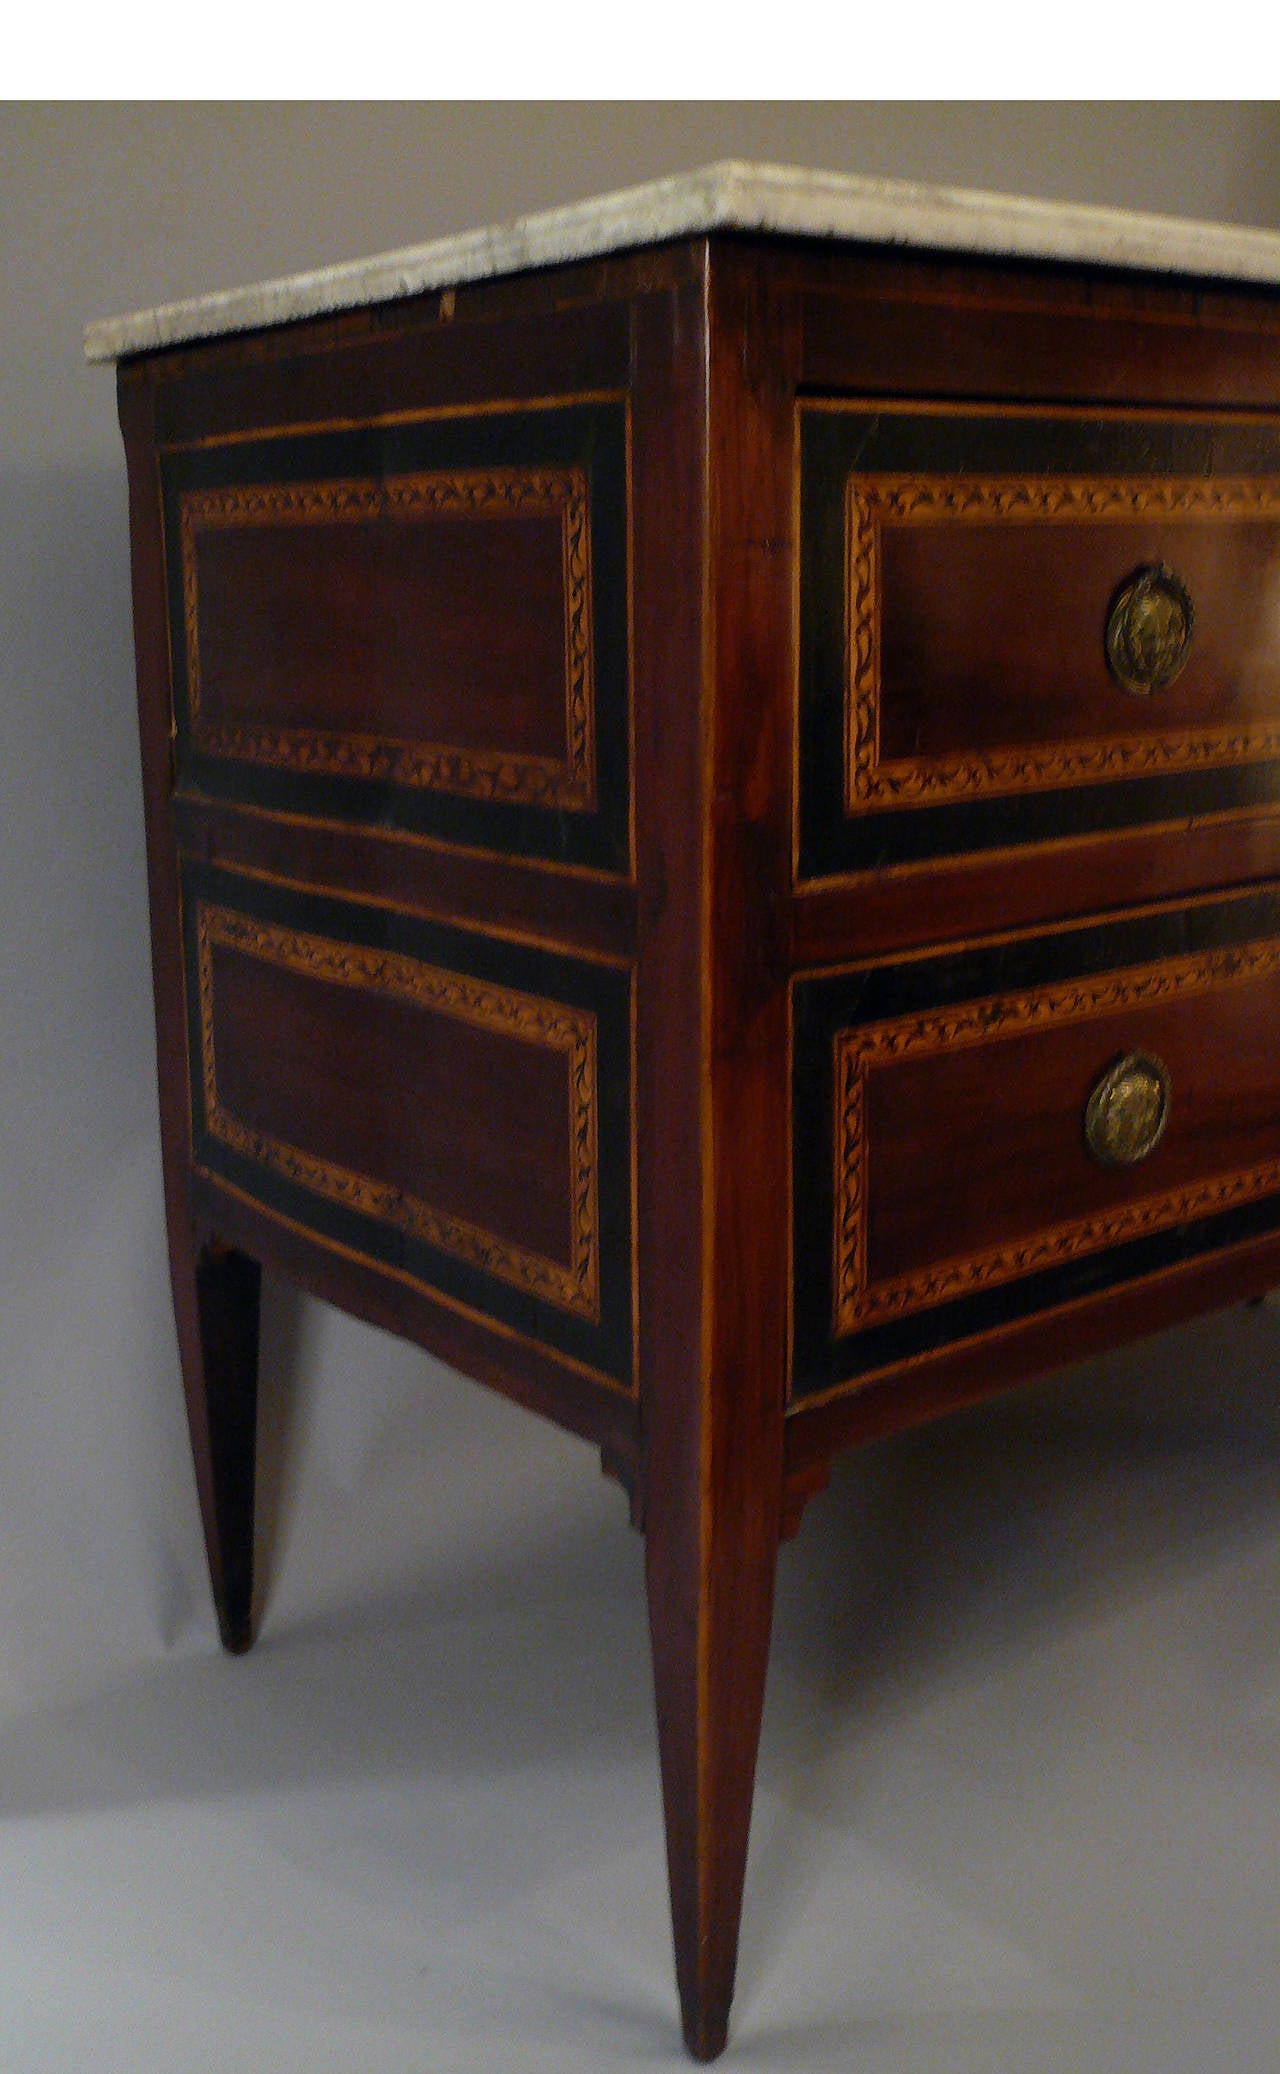 Attributed to Maggiolini, this marble-top two-drawer commode is inlaid with mahogany ebony and satinwood.